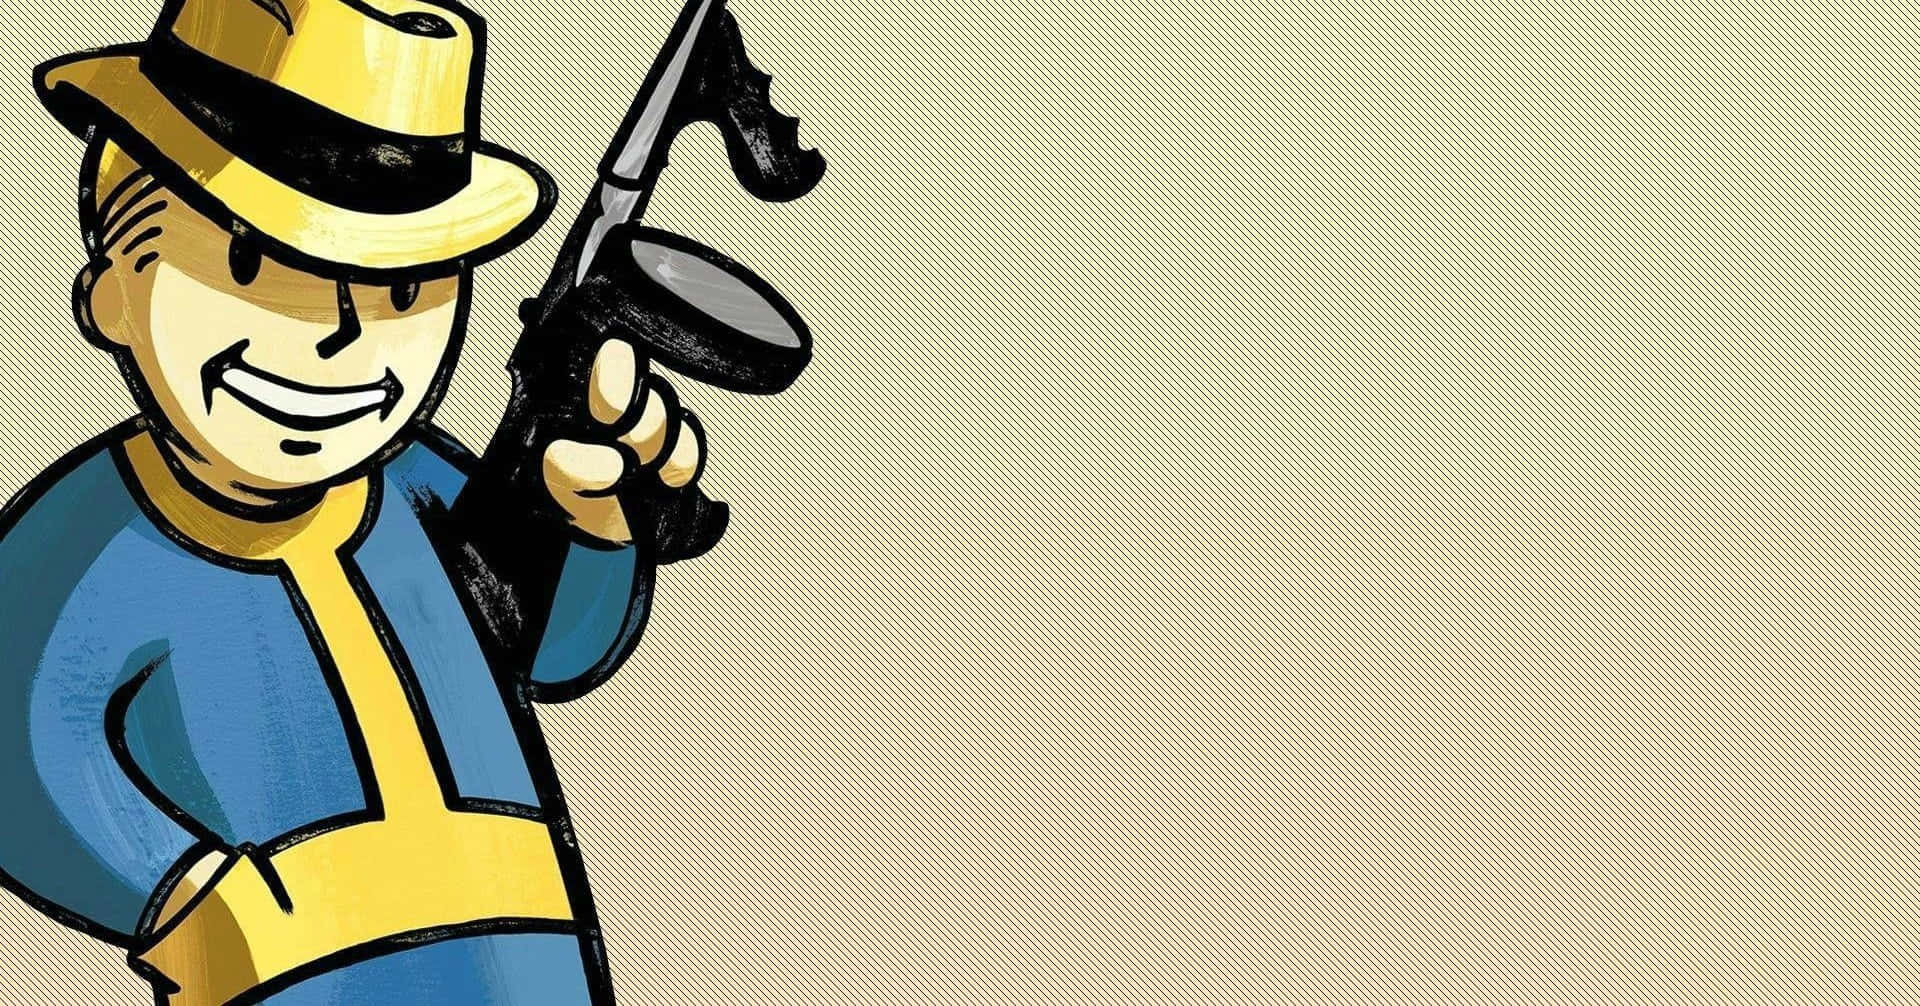 Live the adventure with Vault Boy Wallpaper